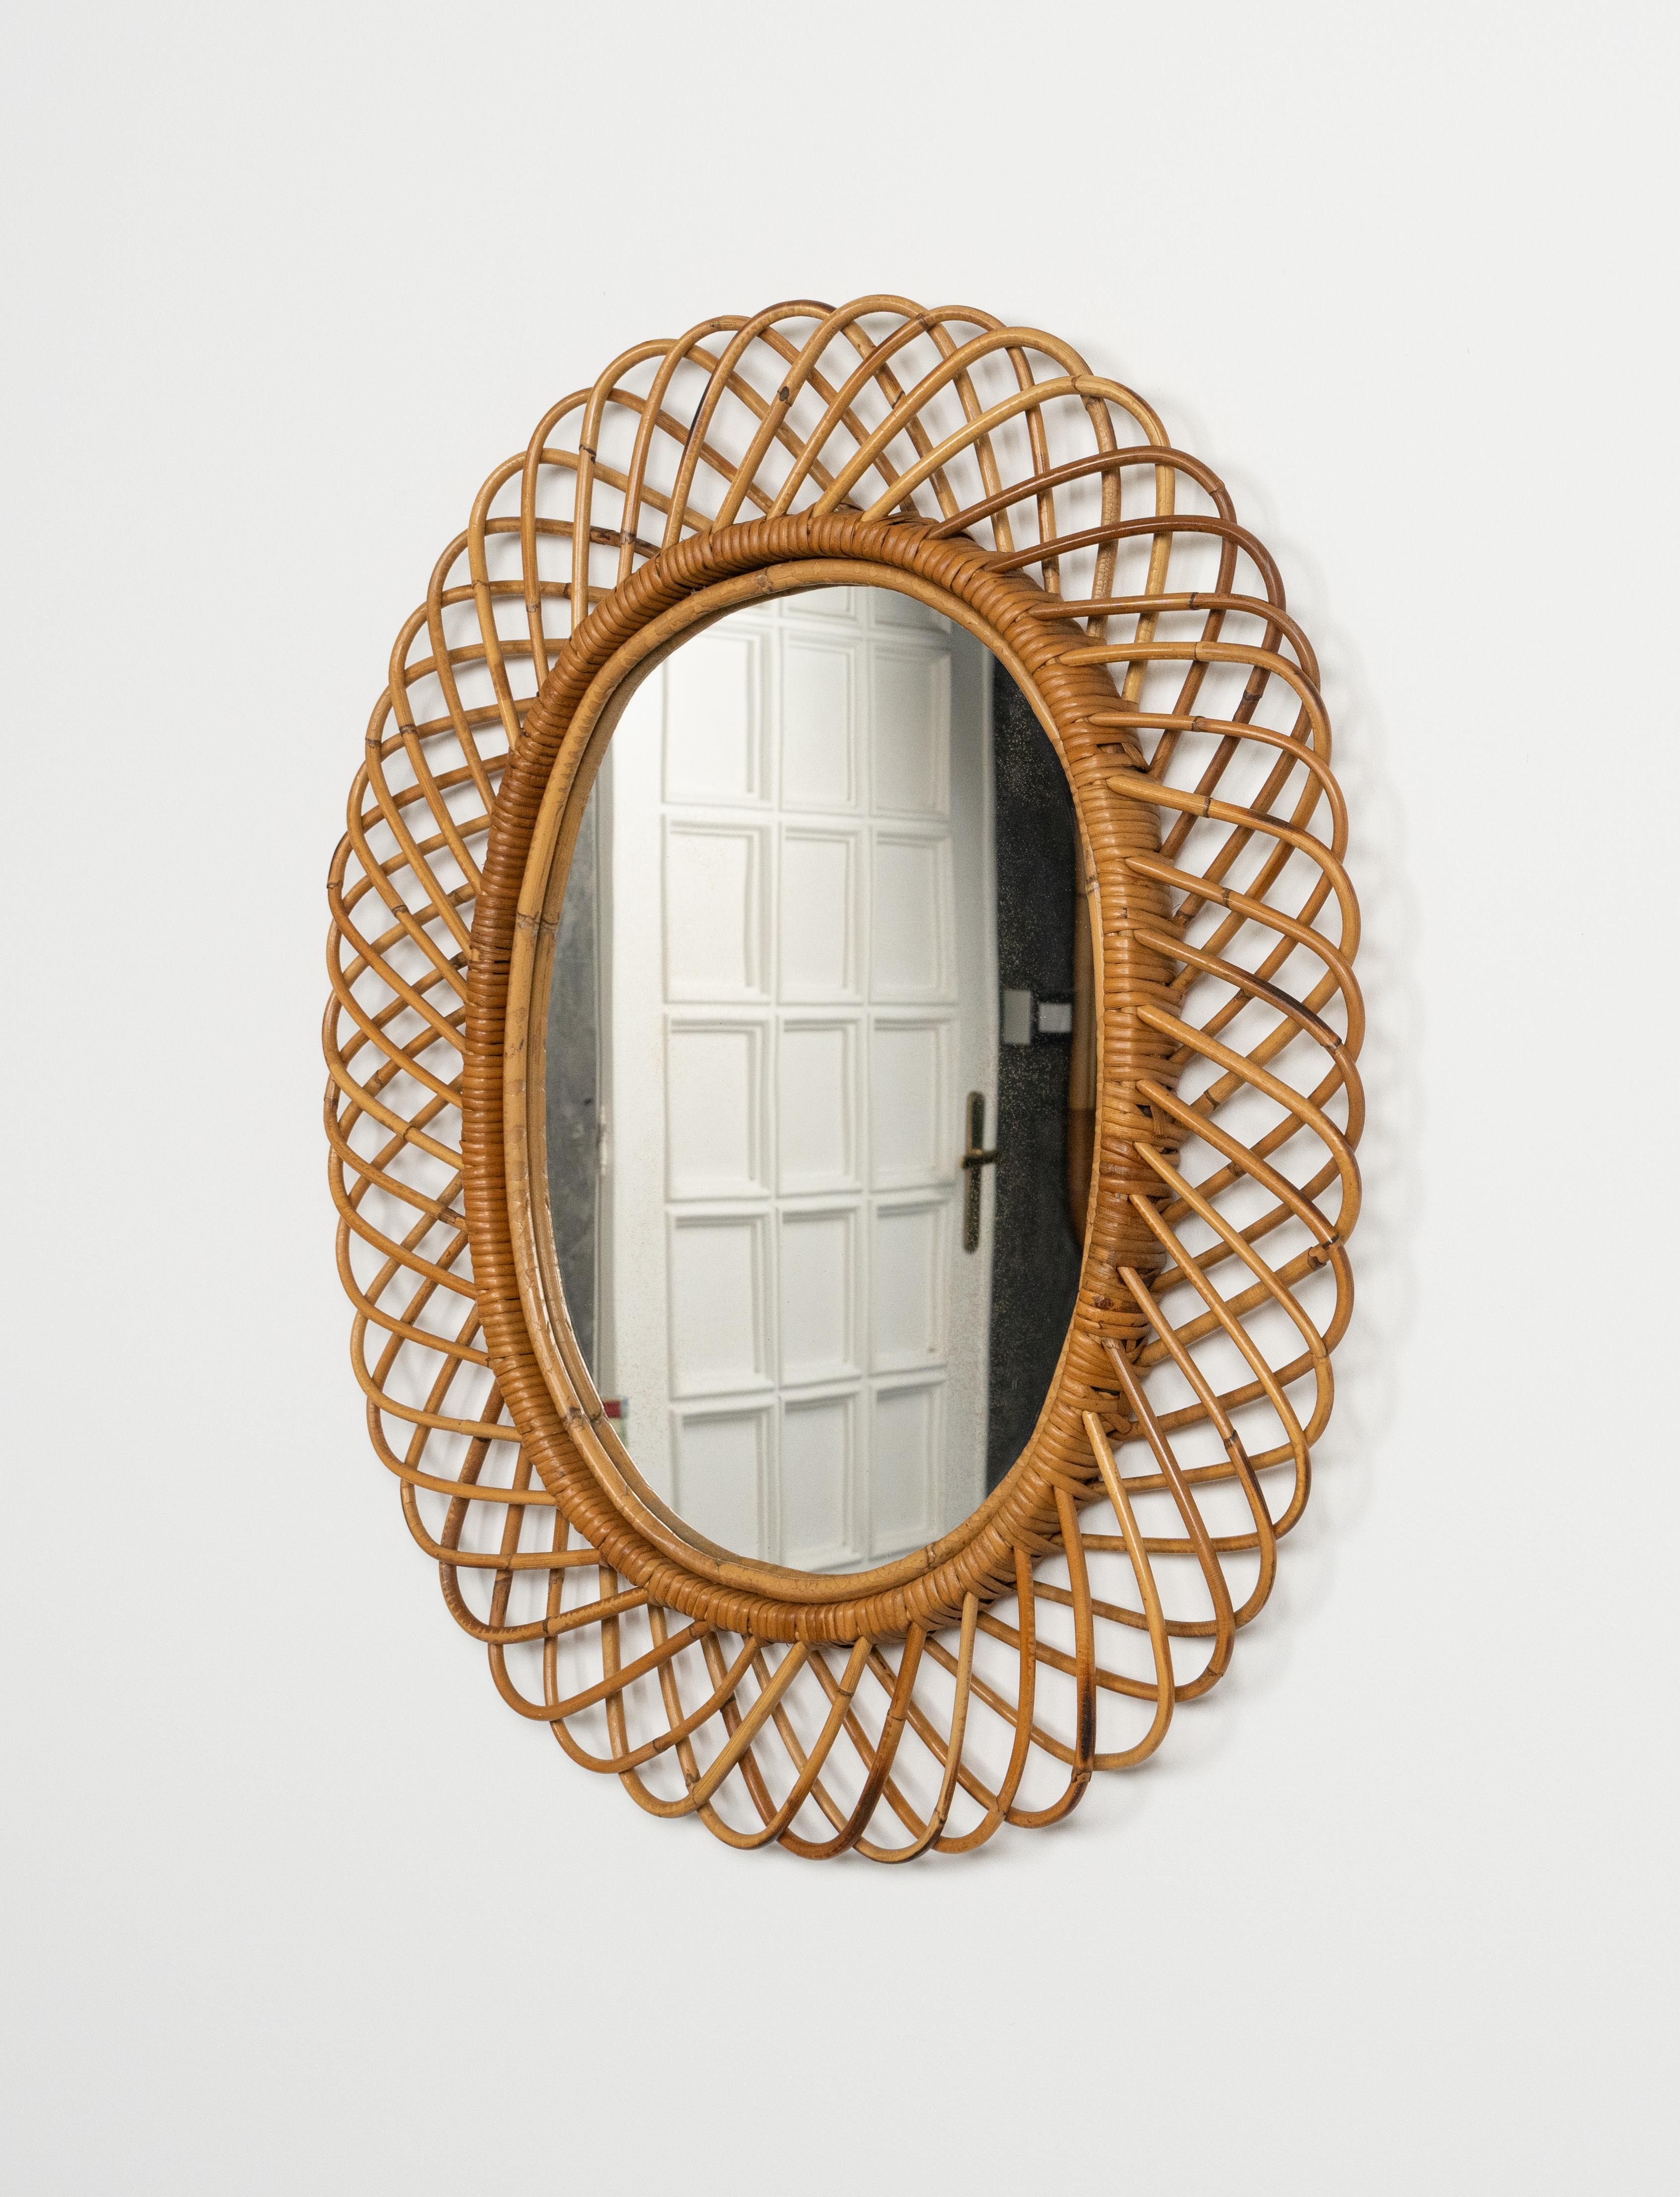 Midcentury Rattan and Bamboo Oval Wall Mirror by Franco Albini, Italy 1960s For Sale 3